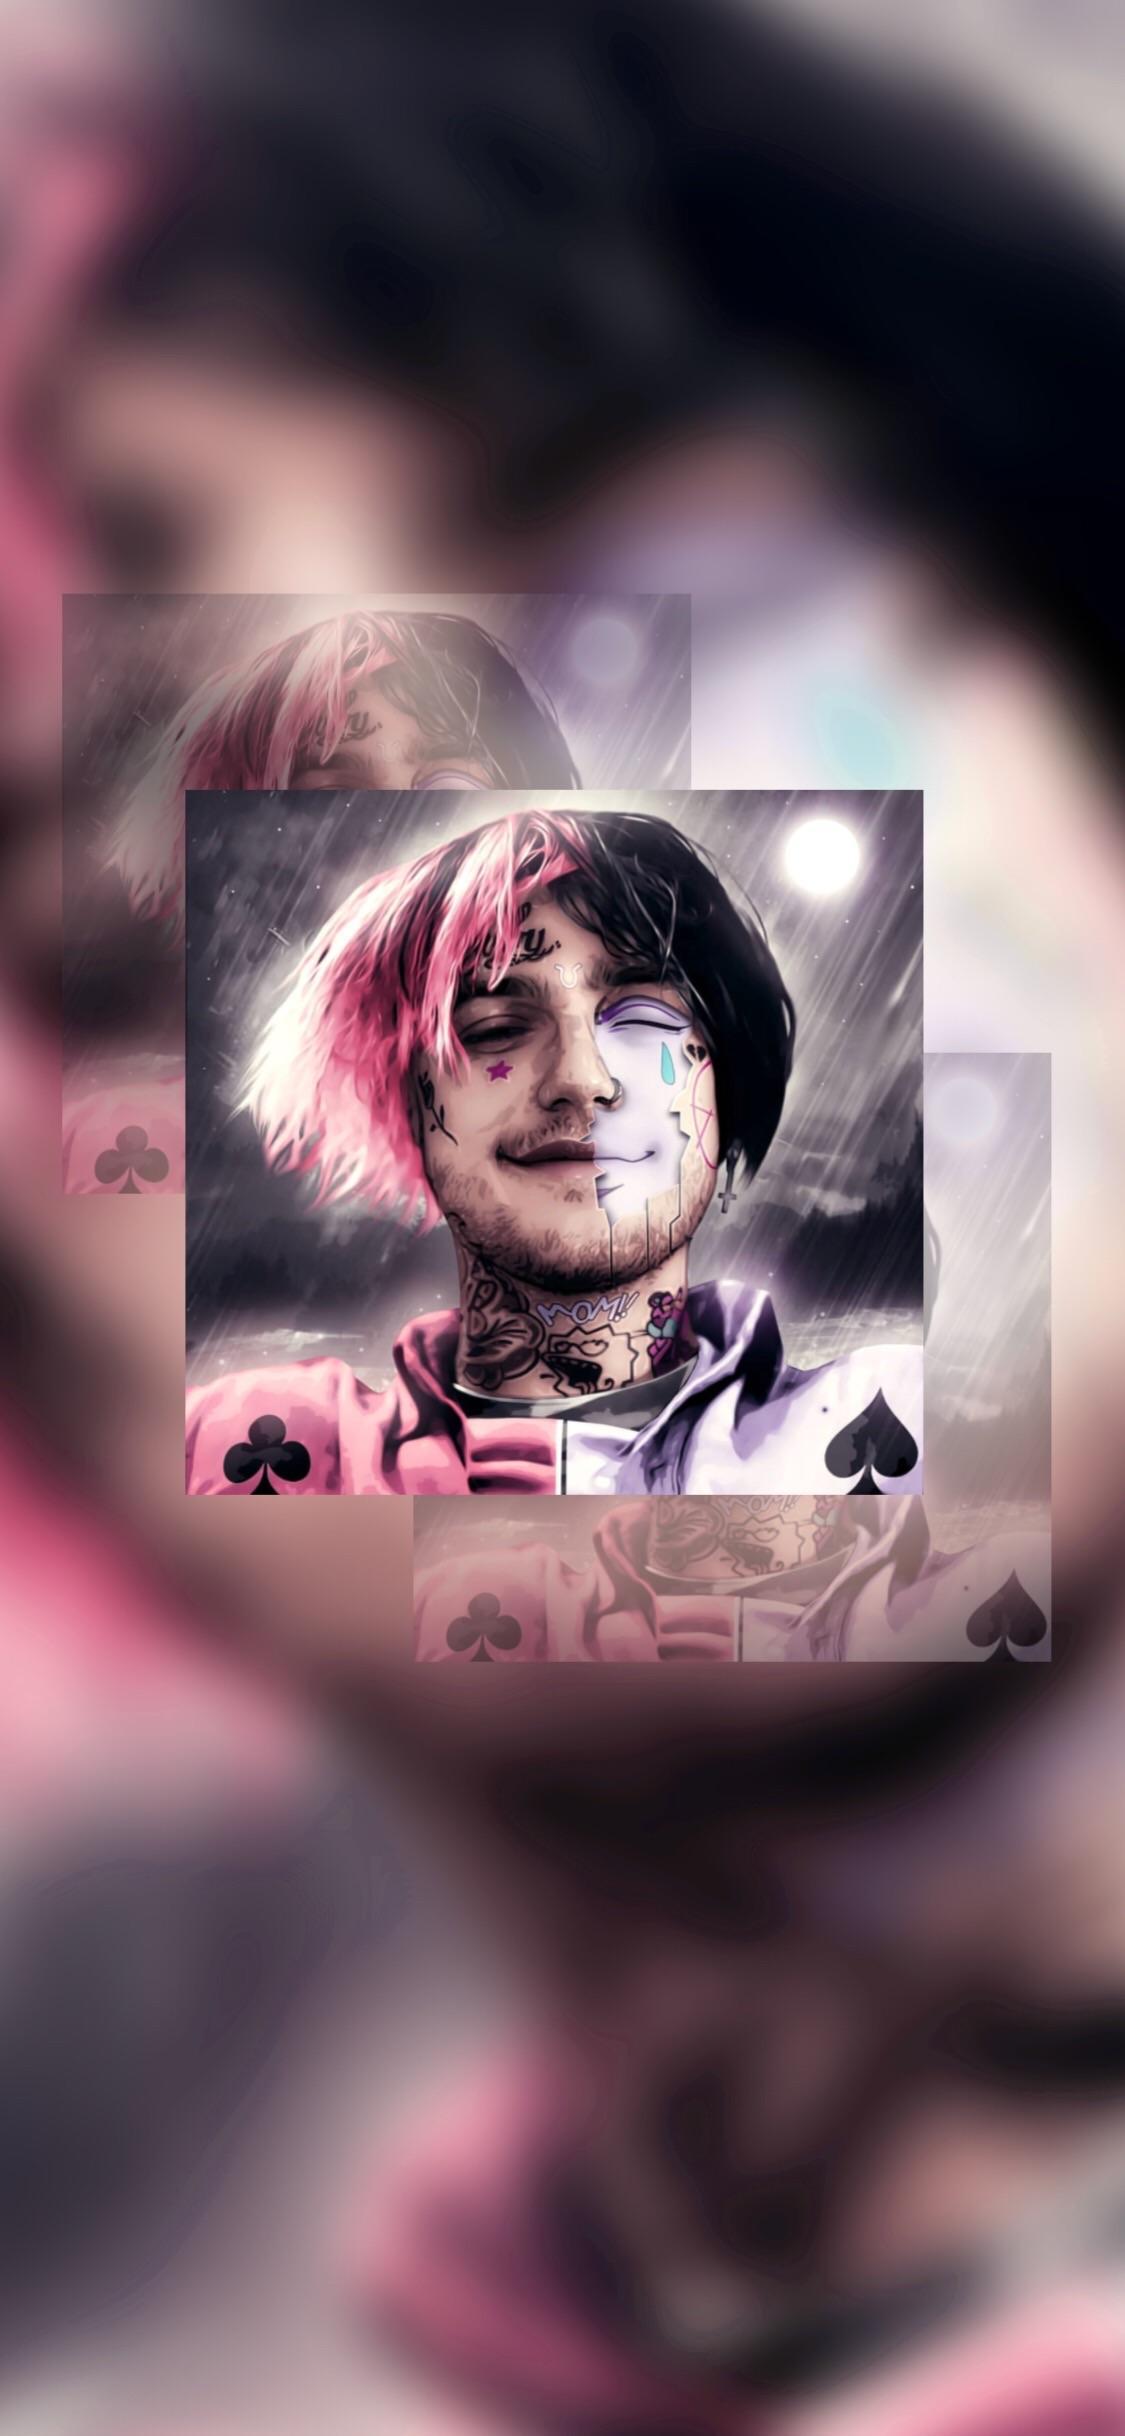 Made a Lil Peep wallpaper for the iPhone X, Thoughts?, UPVOTE if you